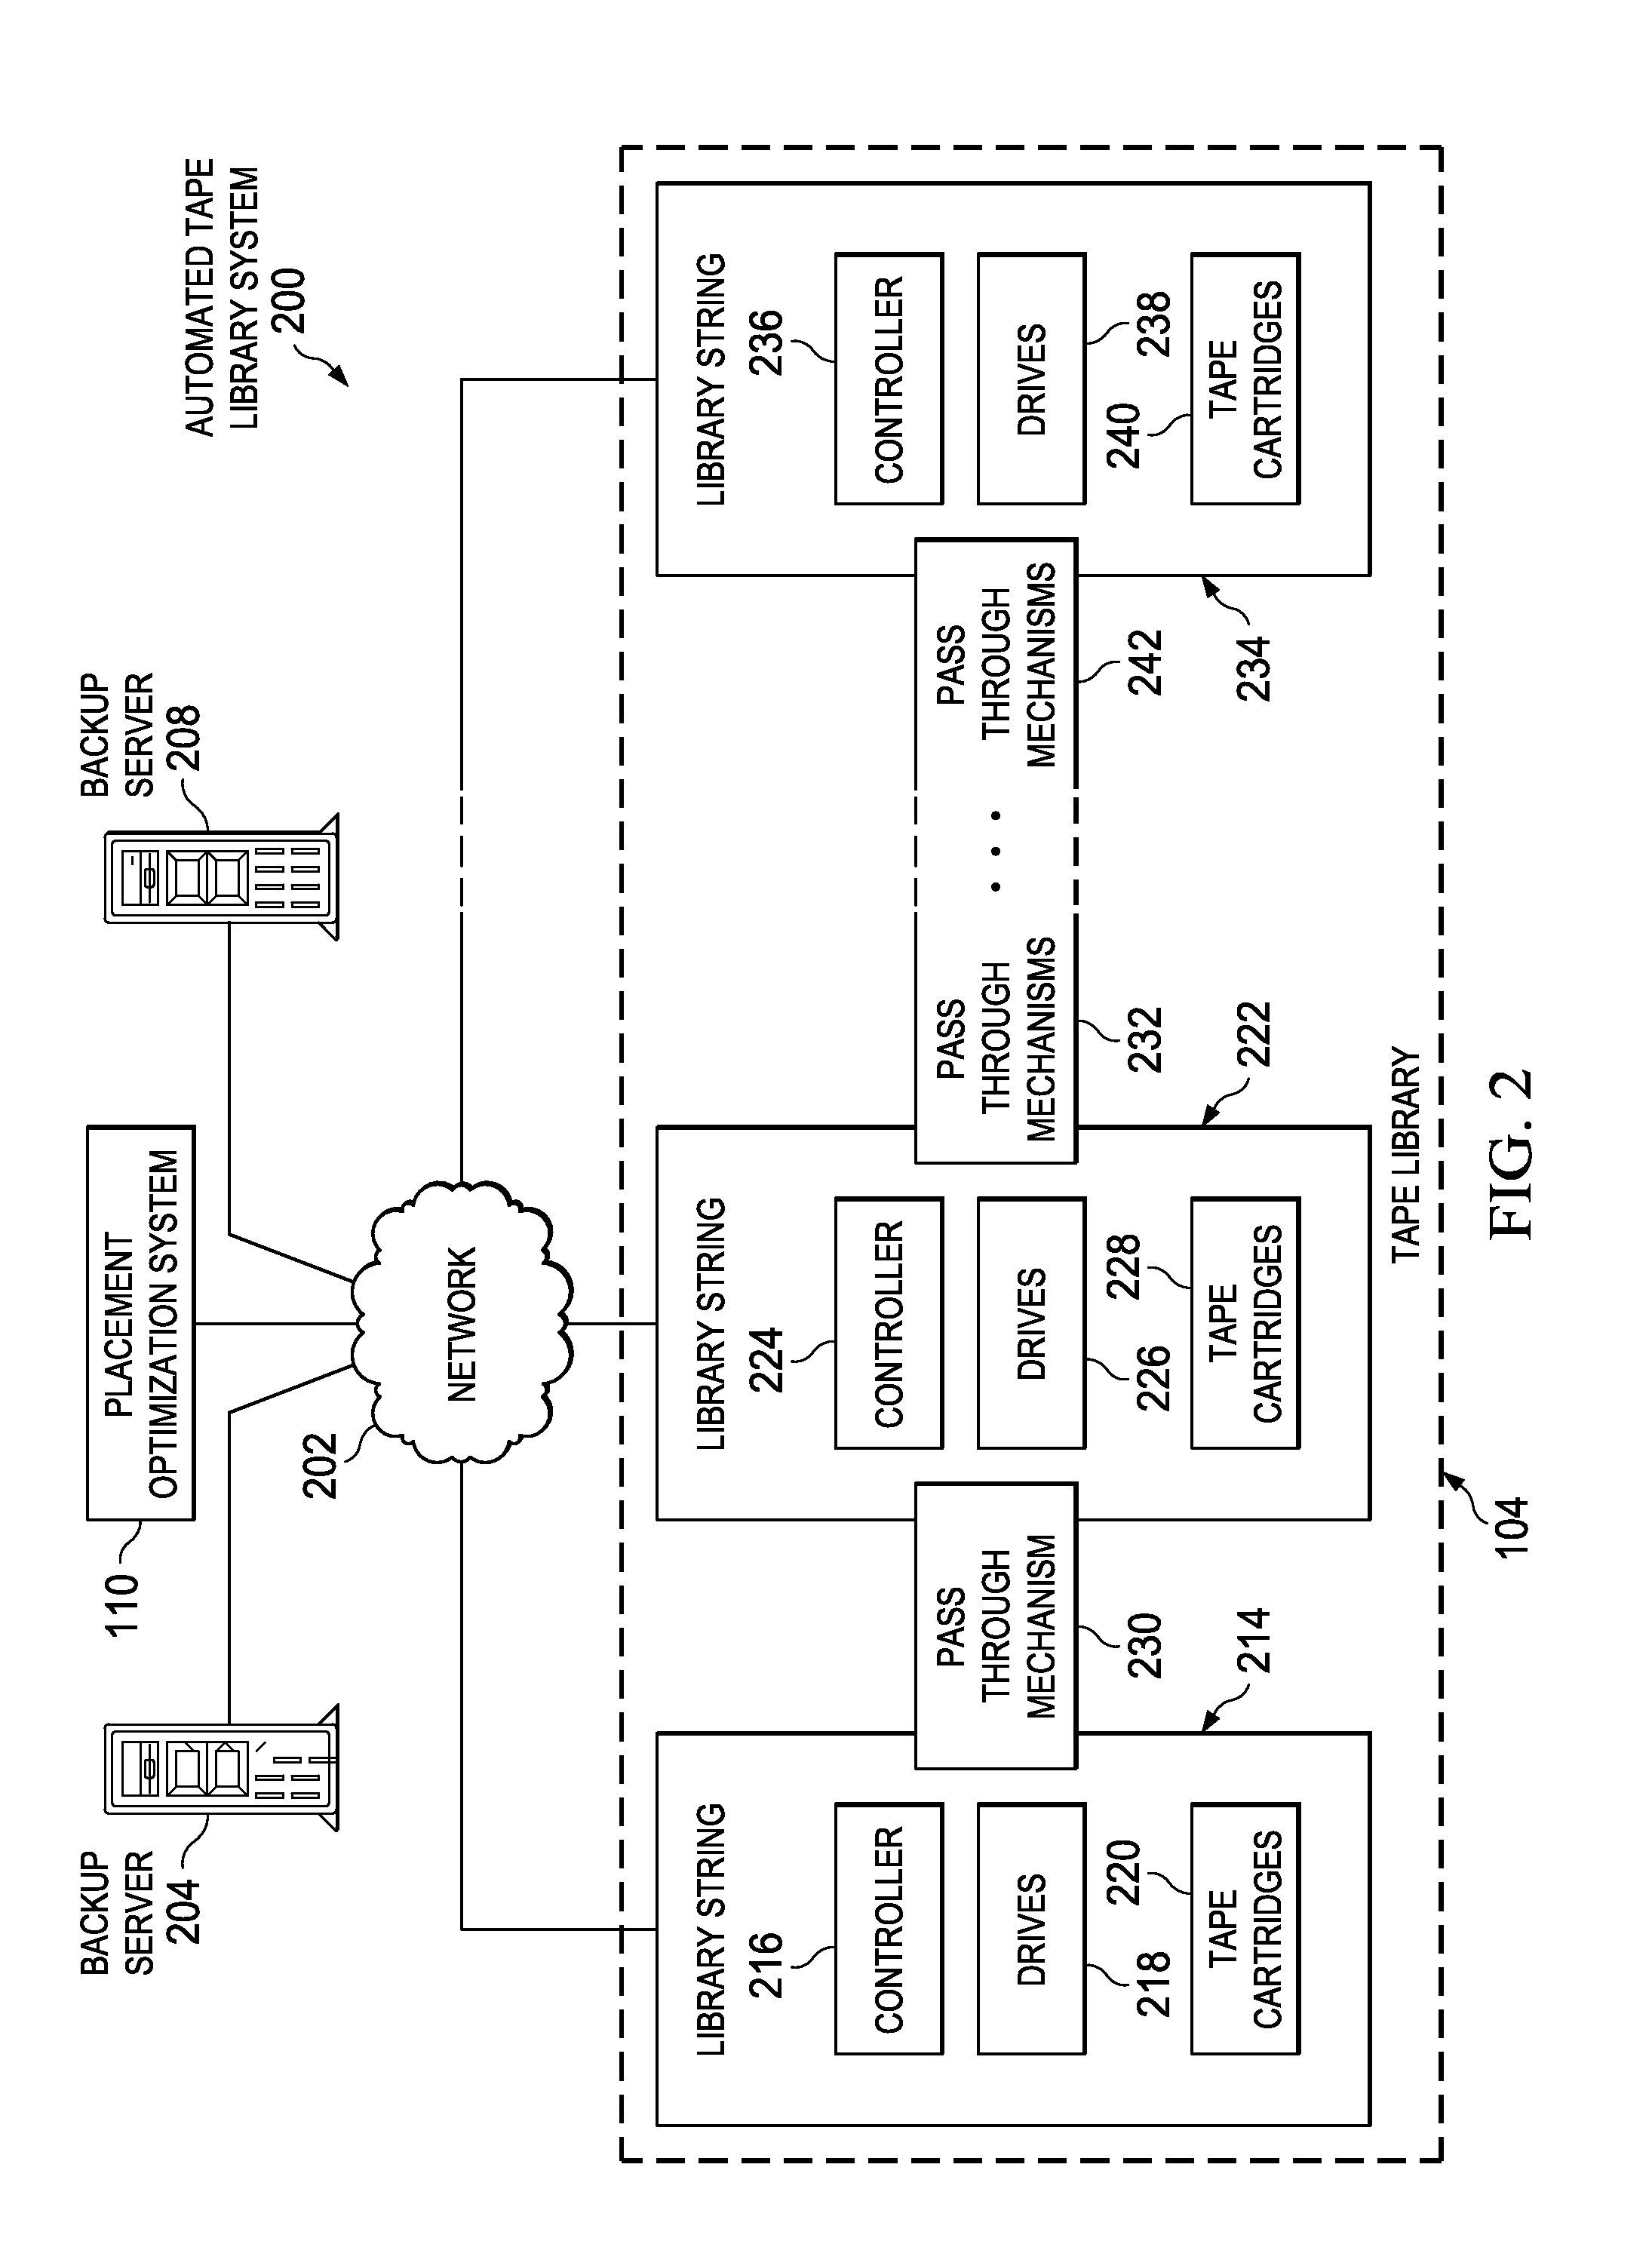 Balancing of data tape cartridges in tape libraries with pass-through mechanism